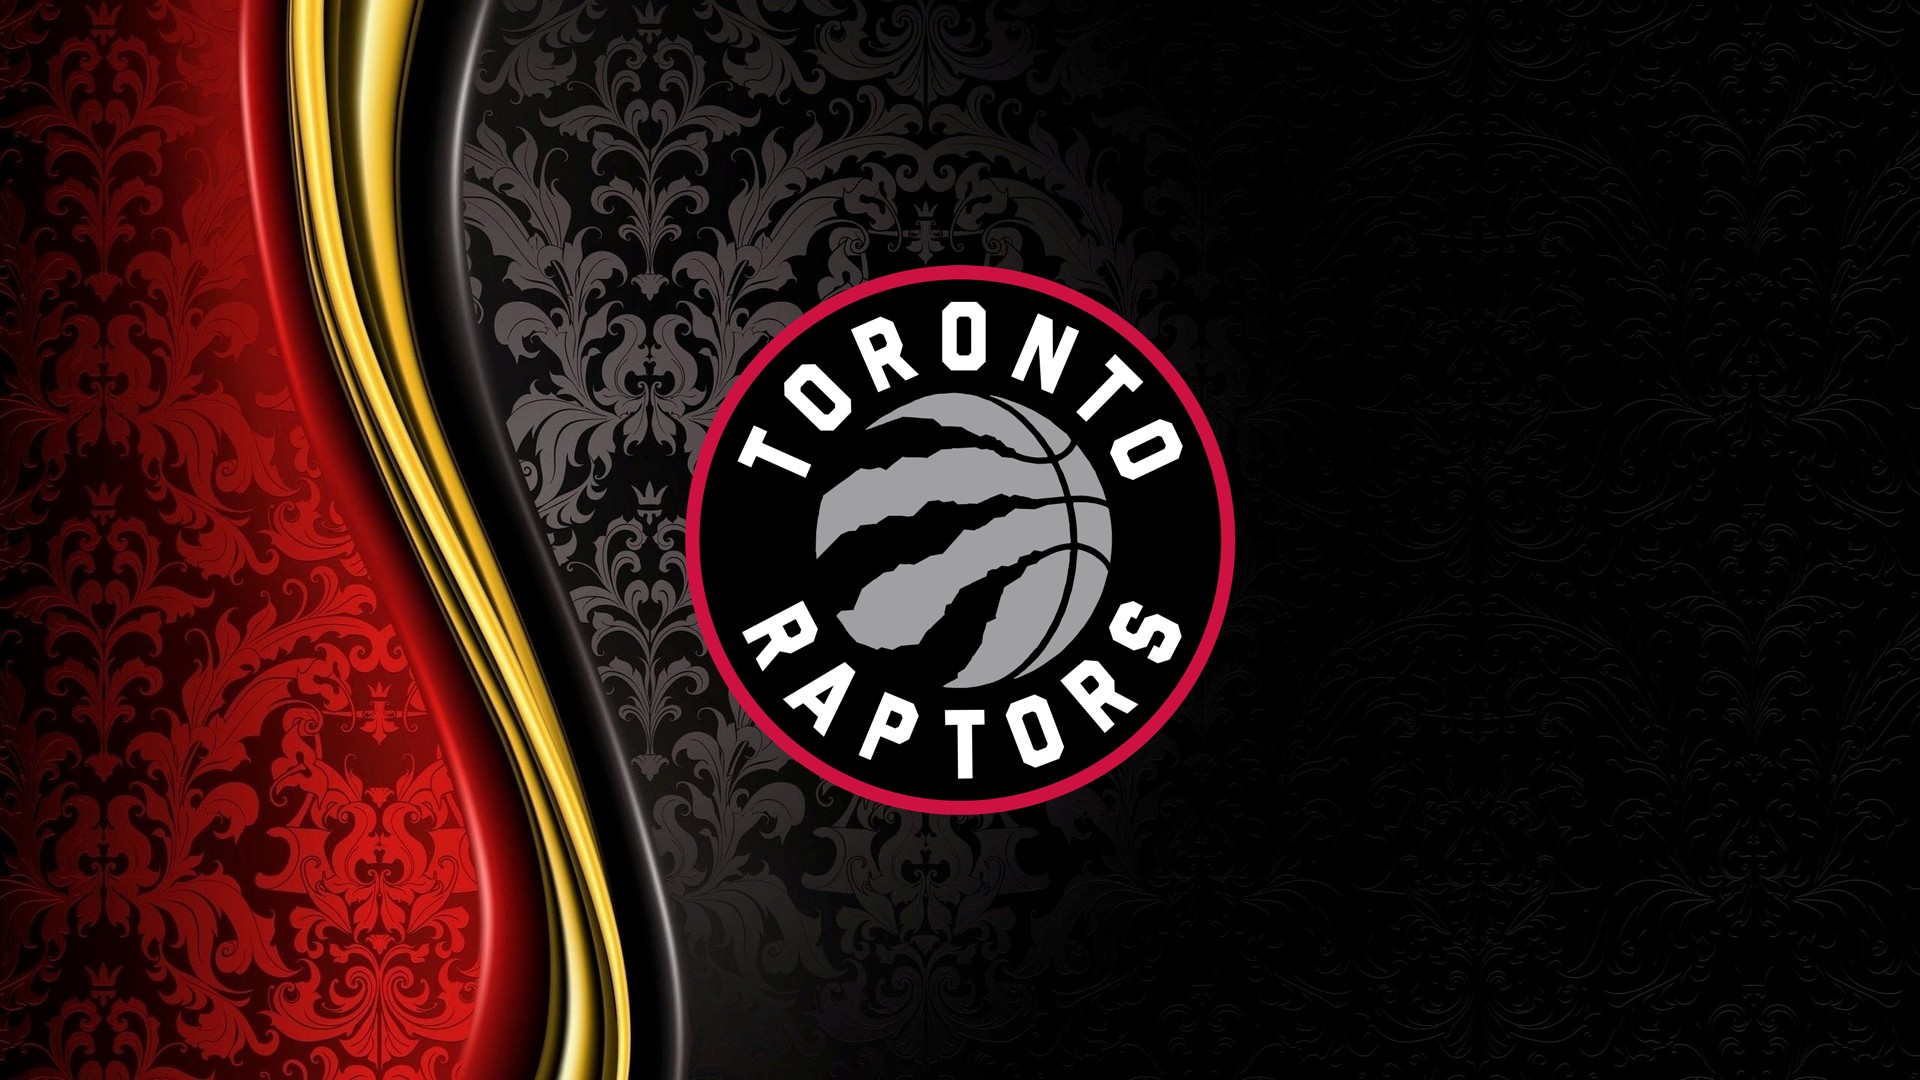 Basketball Toronto Wallpaper HD with image dimensions 1920x1080 pixel. You can make this wallpaper for your Desktop Computer Backgrounds, Windows or Mac Screensavers, iPhone Lock screen, Tablet or Android and another Mobile Phone device